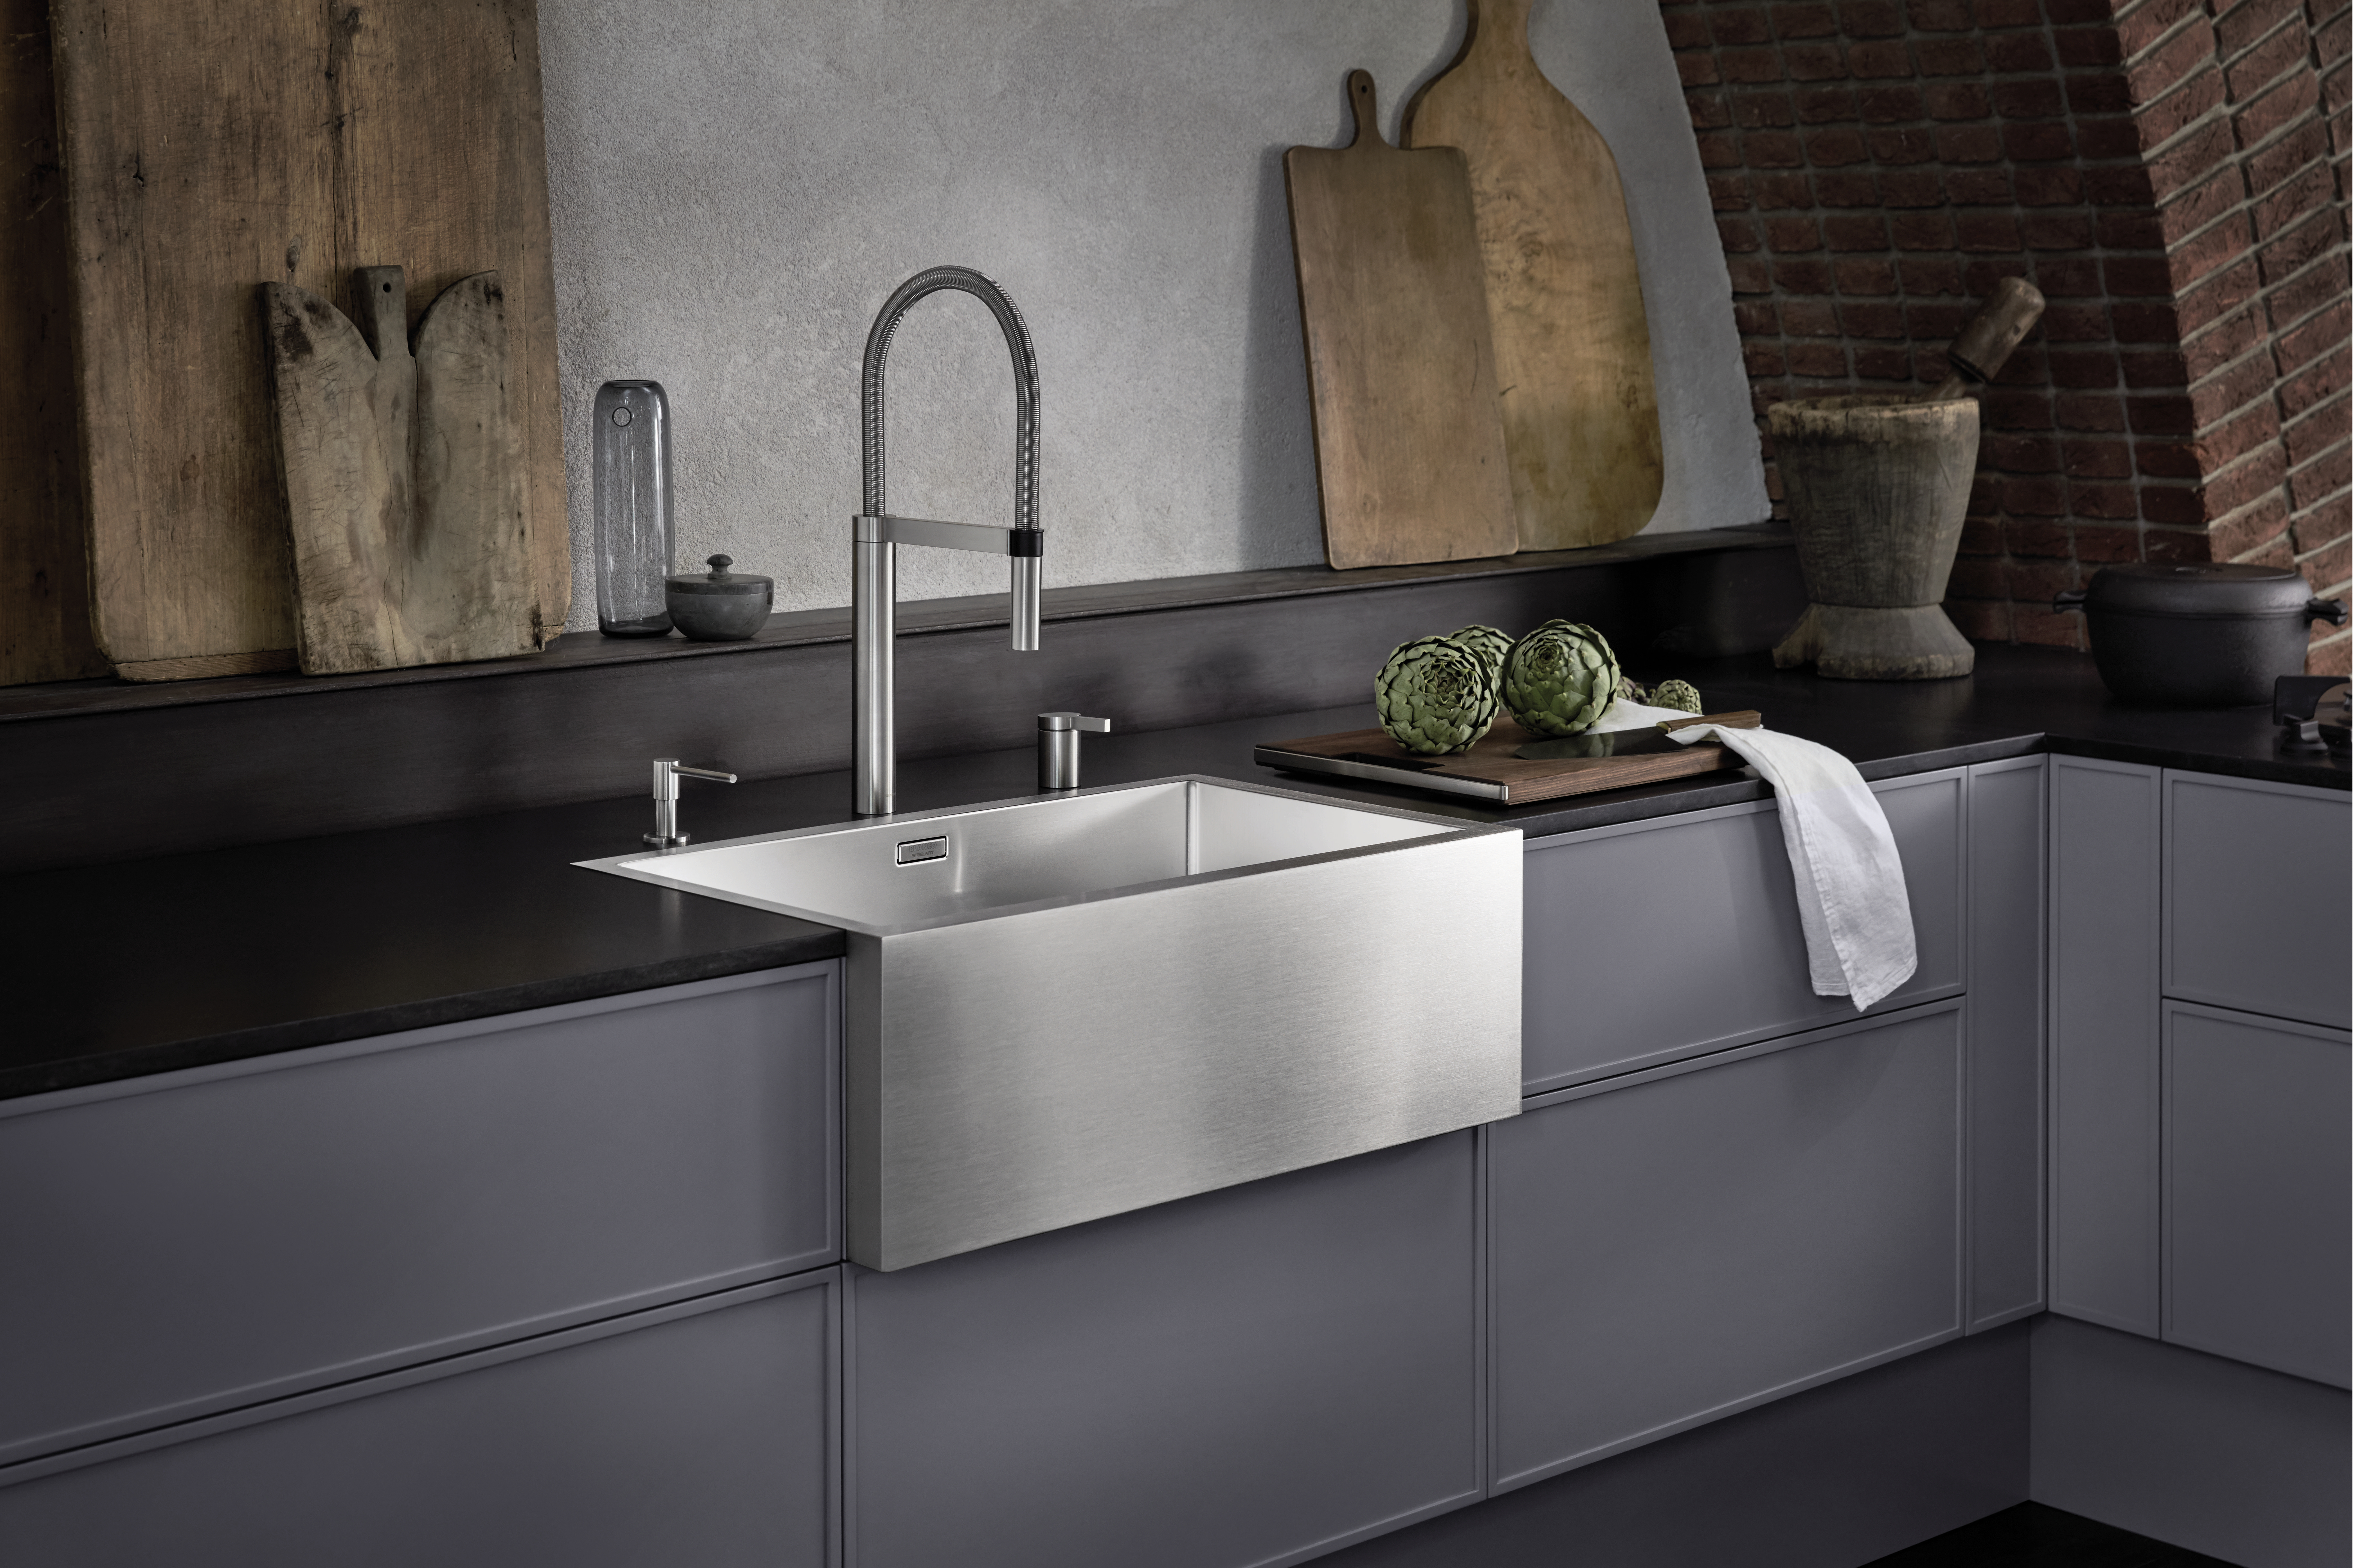 Stainless steel farmhouse-style sink meets history